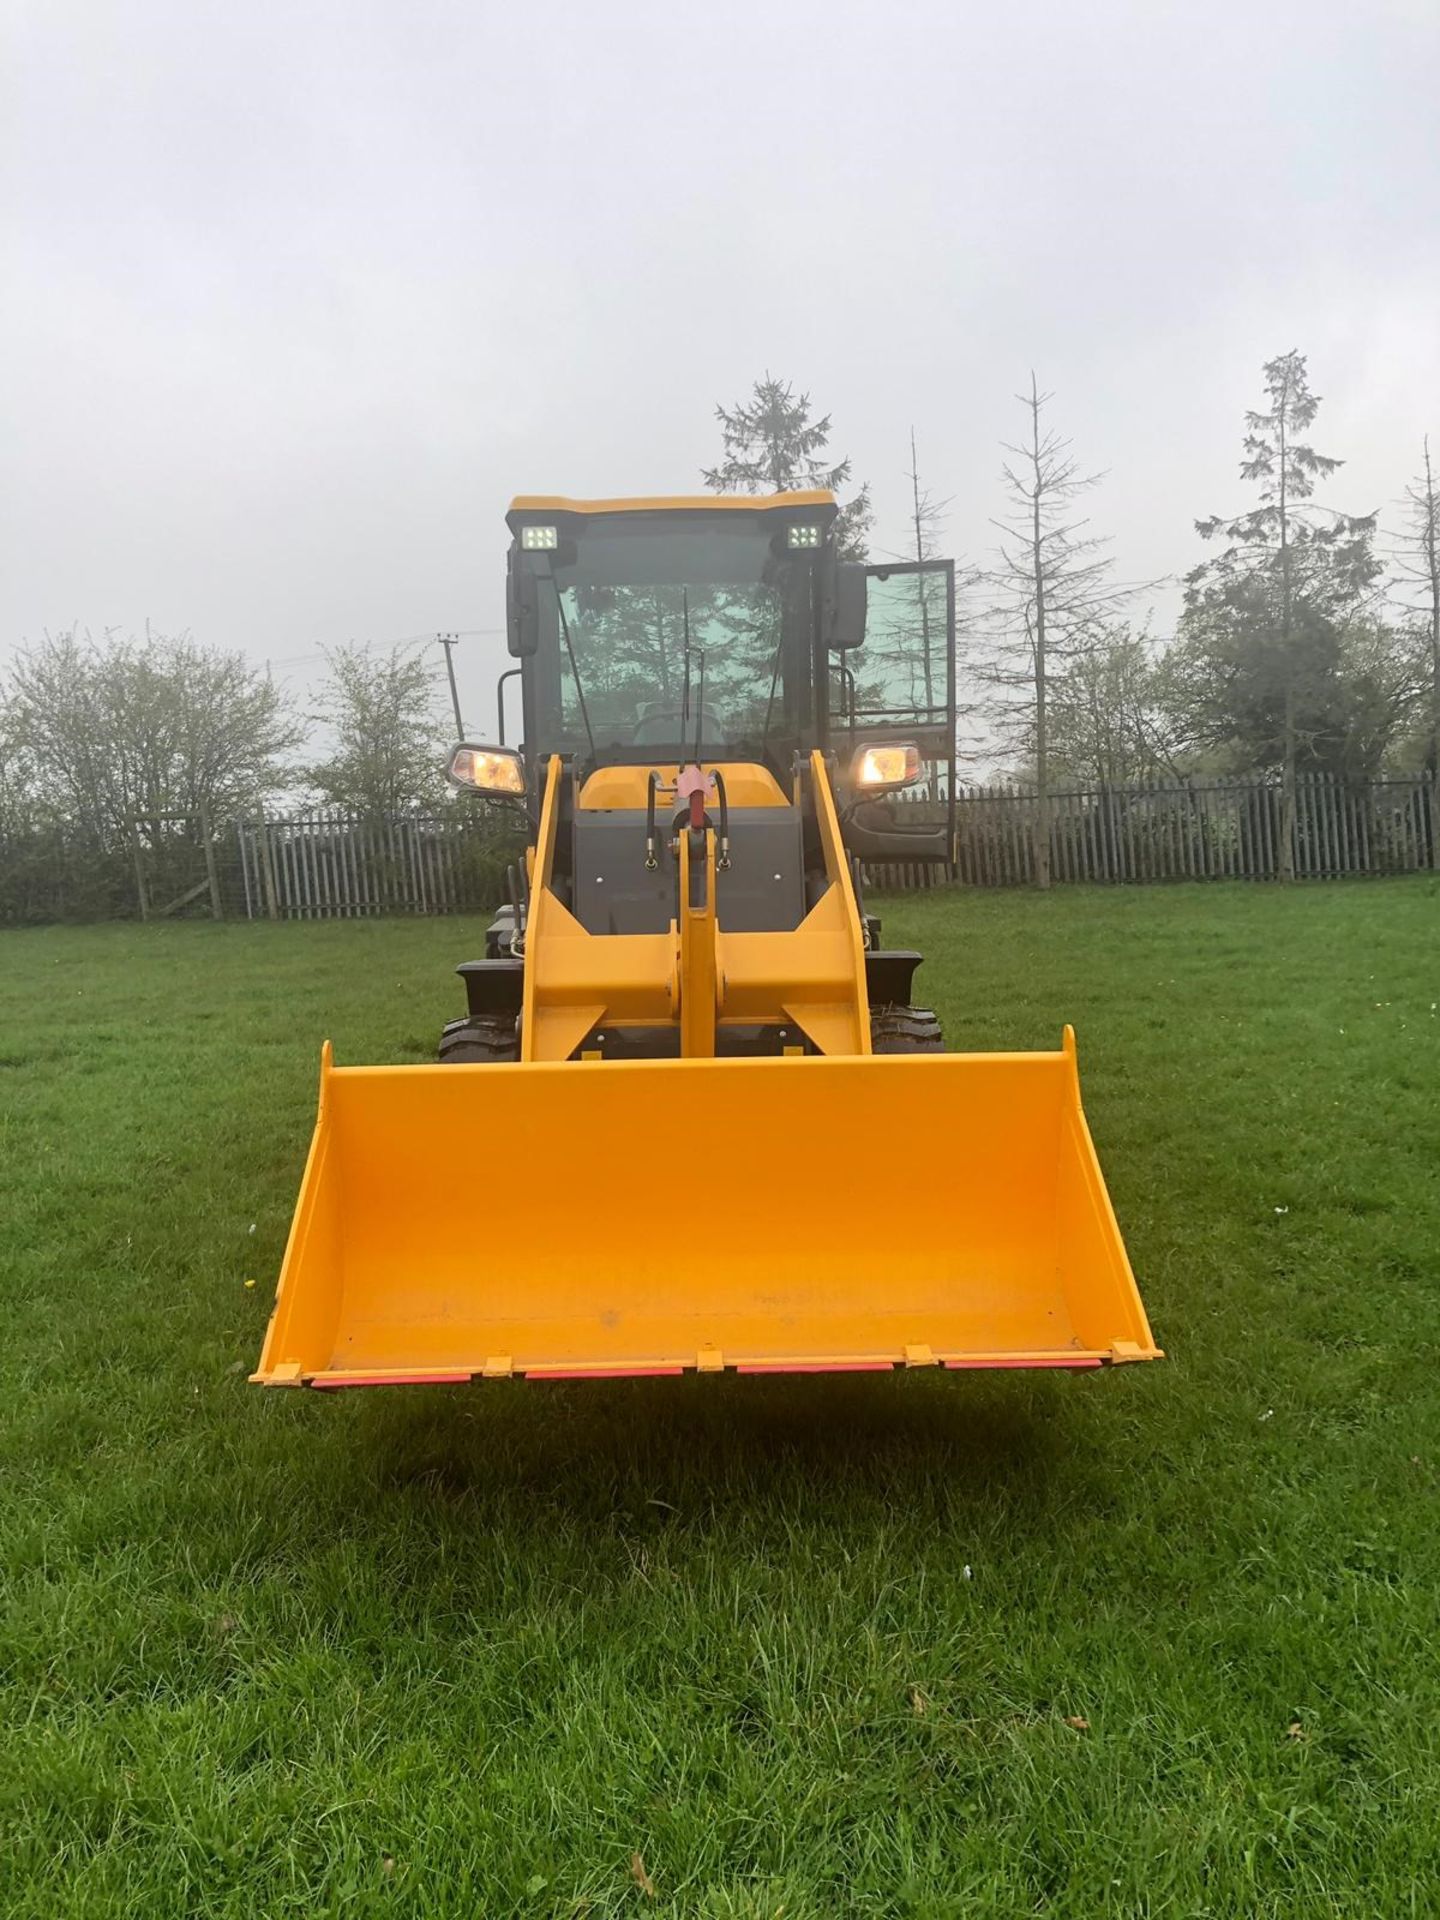 2019 BRAND NEW AND UNUSED ATTACK 1610 WHEEL LOADER, RUNS WORKS AND LIFTS *PLUS VAT* - Image 2 of 9